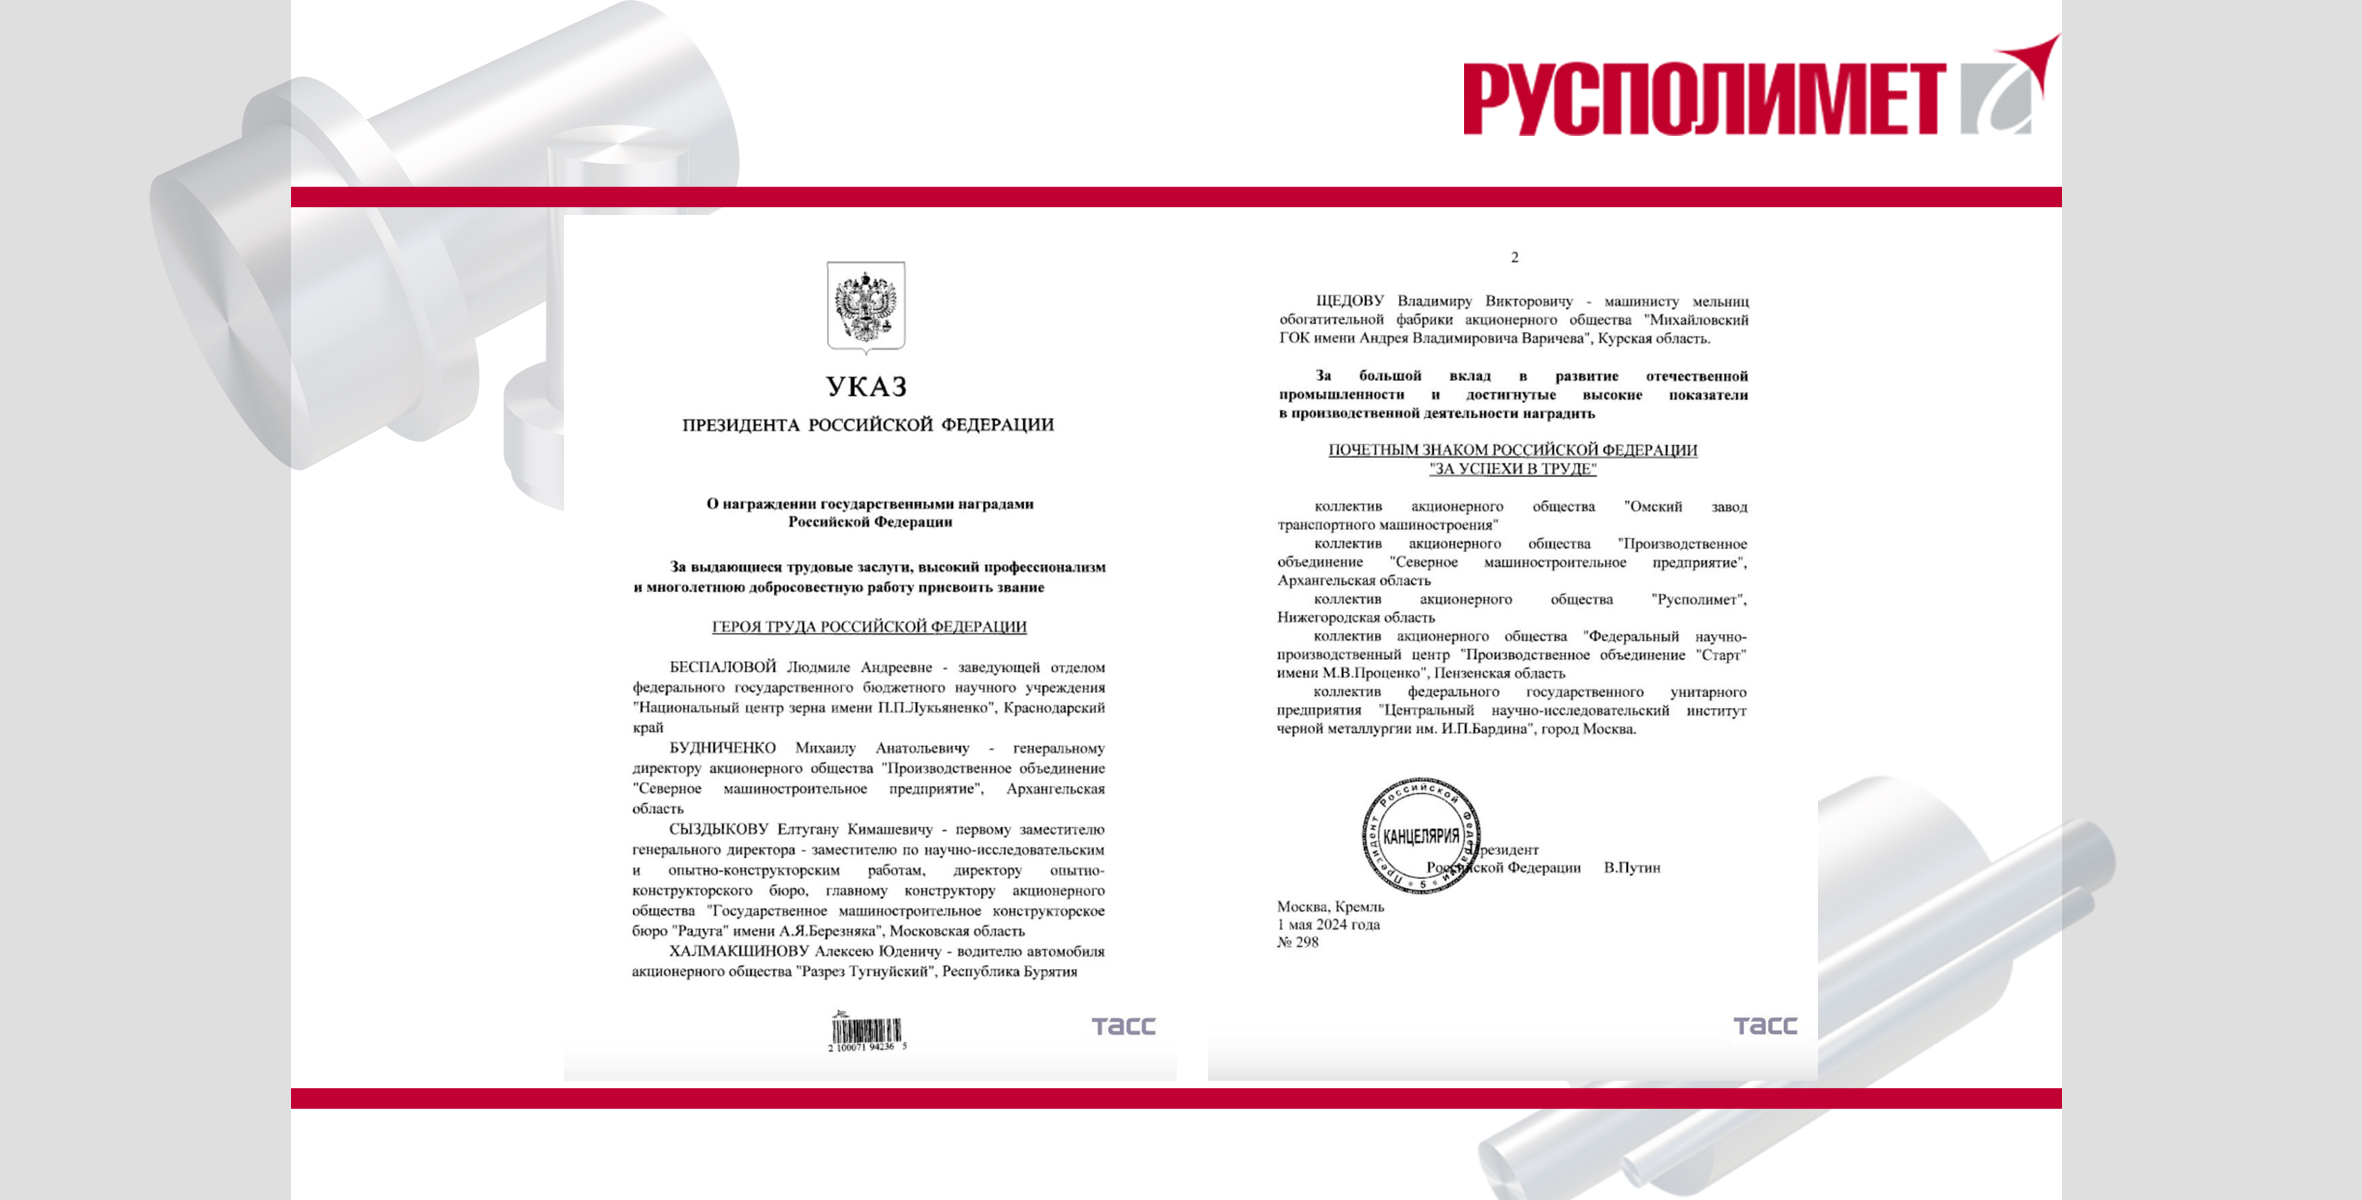 BY DECREE OF THE PRESIDENT OF THE RUSSIAN FEDERATION V.V. PUTIN, JSC RUSPOLYMET WAS AWARDED THE HONORARY BADGE OF THE RUSSIAN FEDERATION "FOR SUCCESS IN WORK"